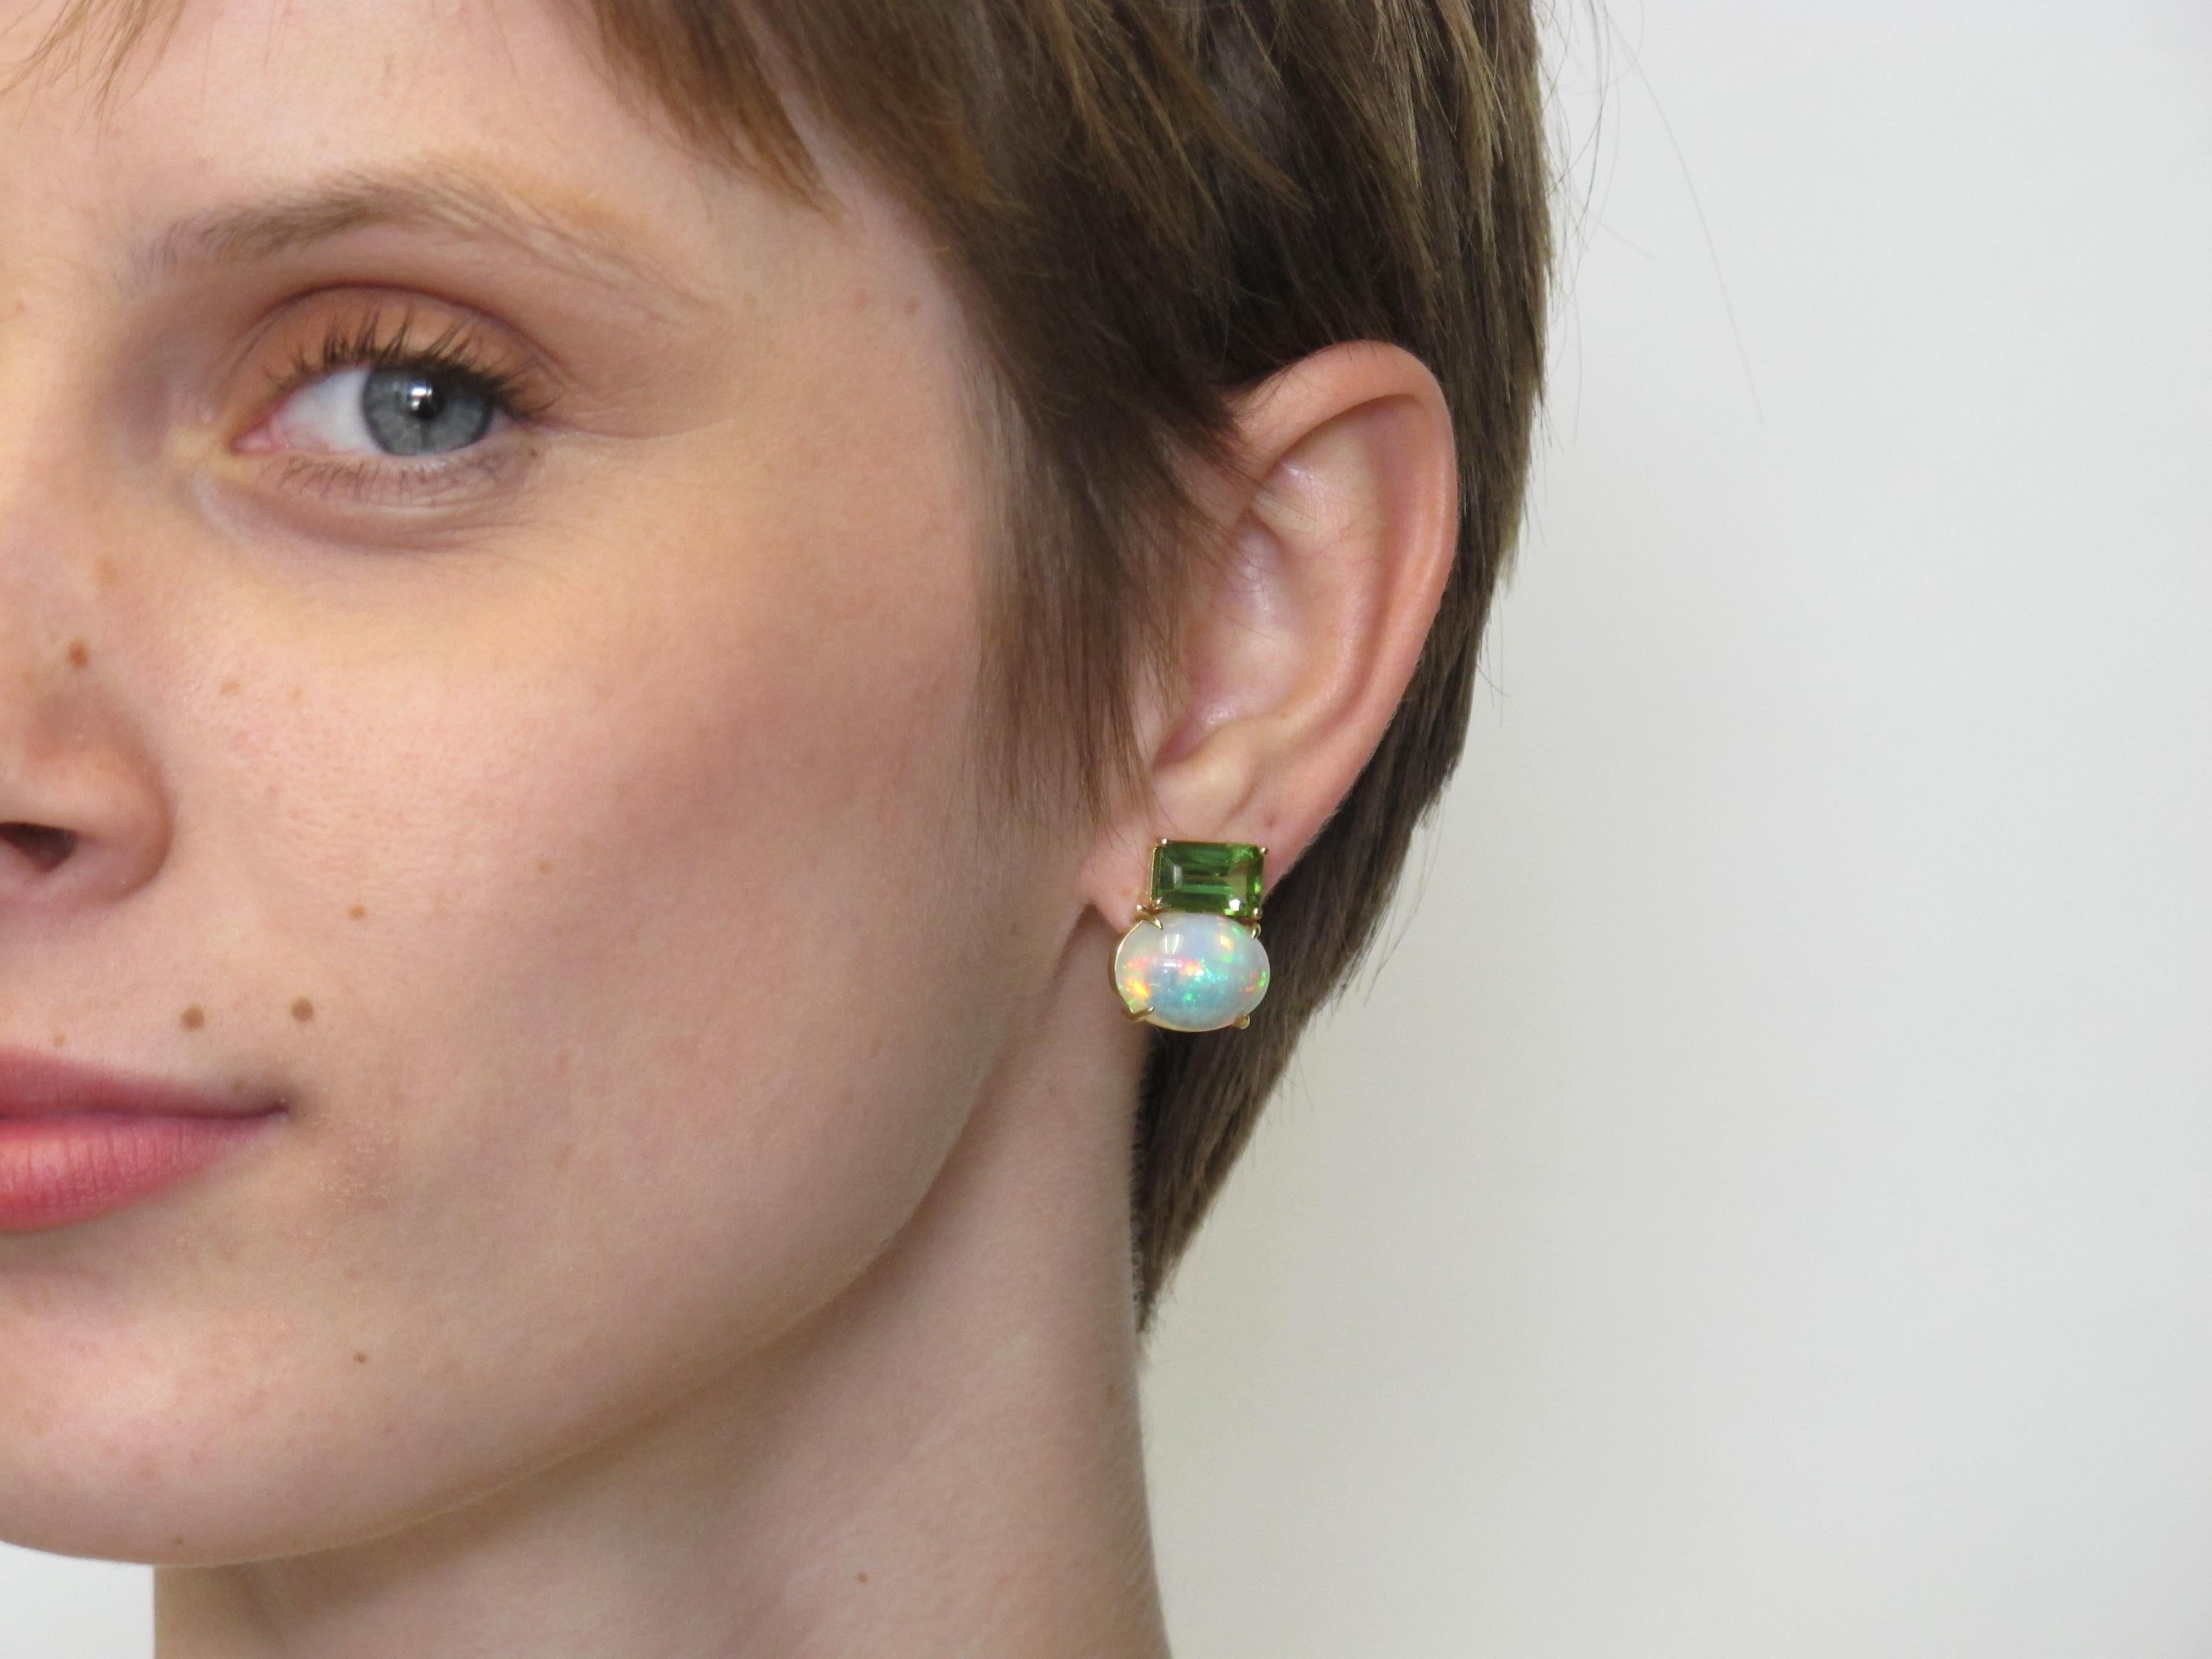 Opals are nature's rainbow gemstones due to their unique play with light. Why not have some of that playfulness on your ears? These bold and unique opal and peridot earrings make a quiet statement when you wear them. The combination of the two